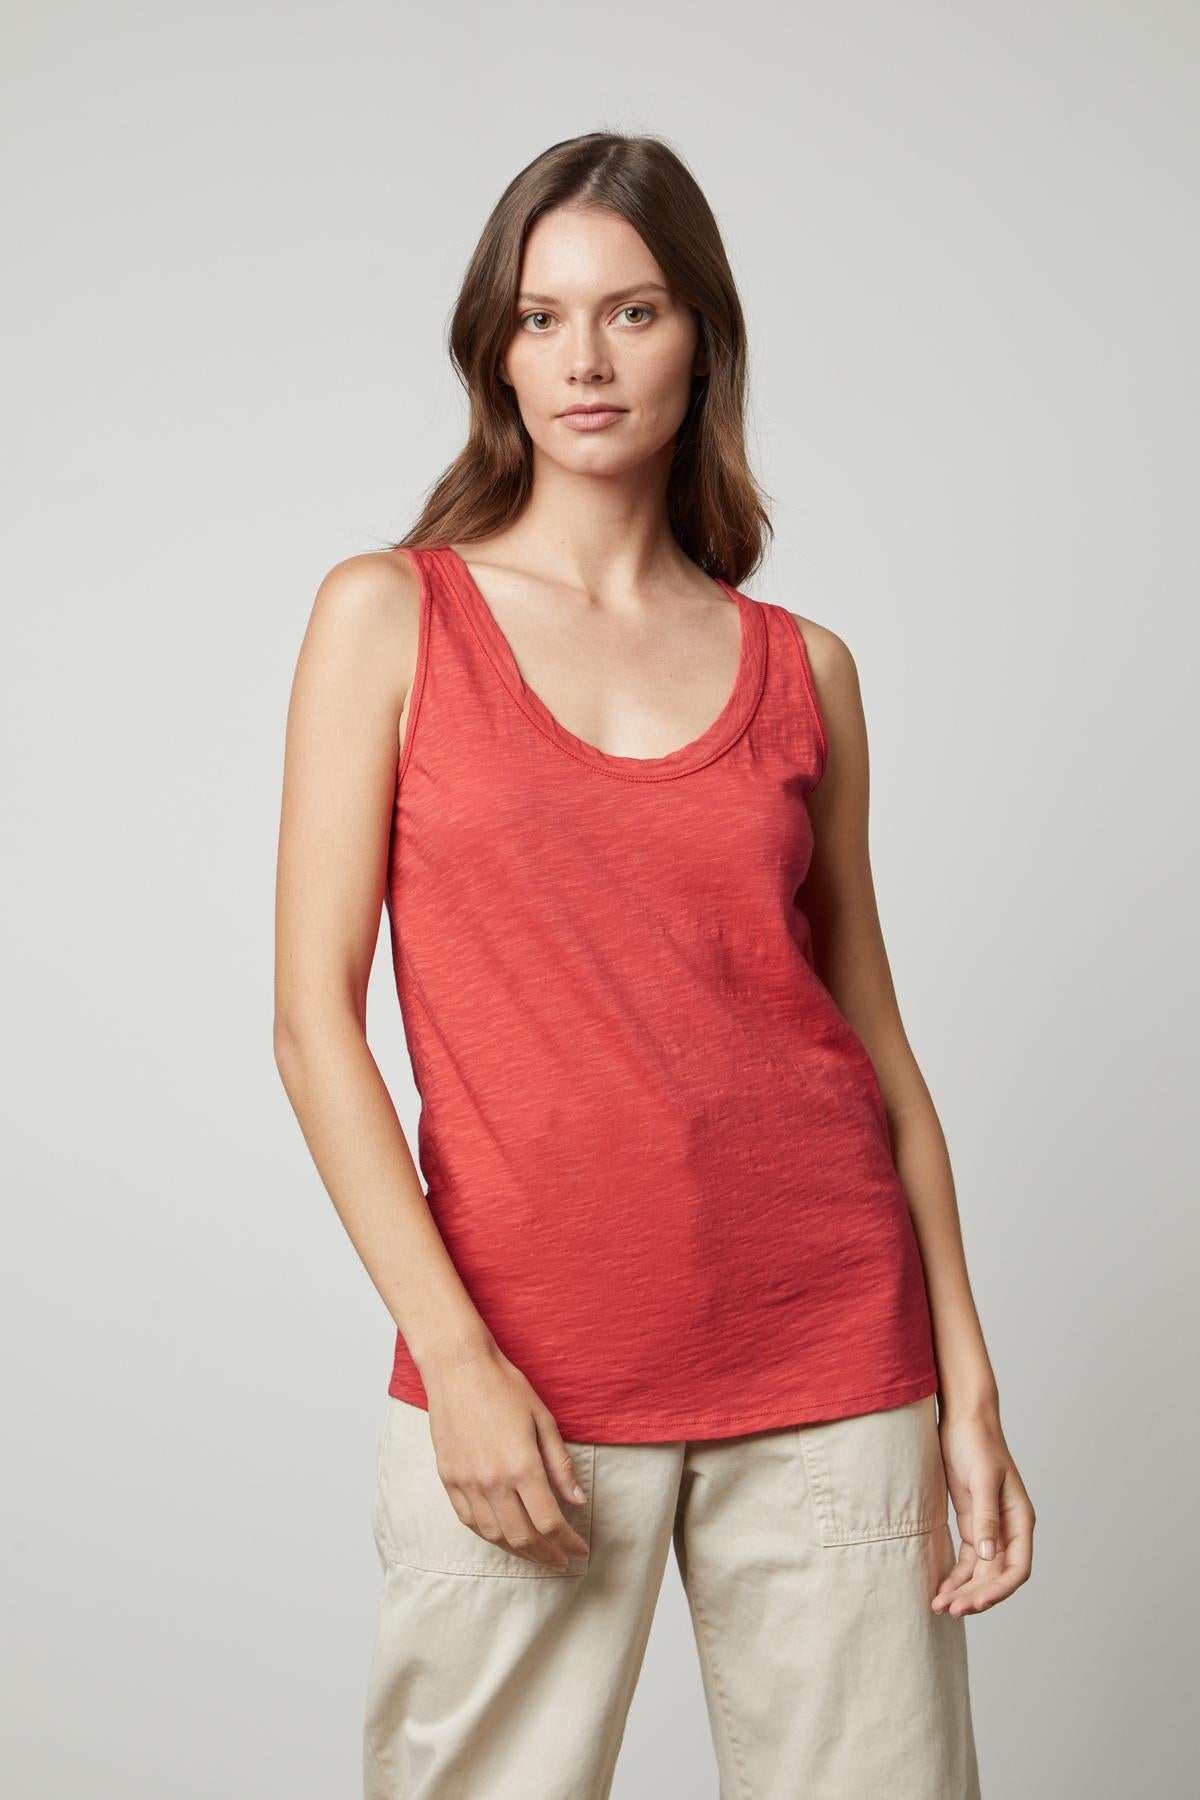 A woman wearing a Velvet by Graham & Spencer JOY ORIGINAL SLUB SCOOP NECK TANK in soft cotton, with flattering arm holes and khaki pants.-35201175716033